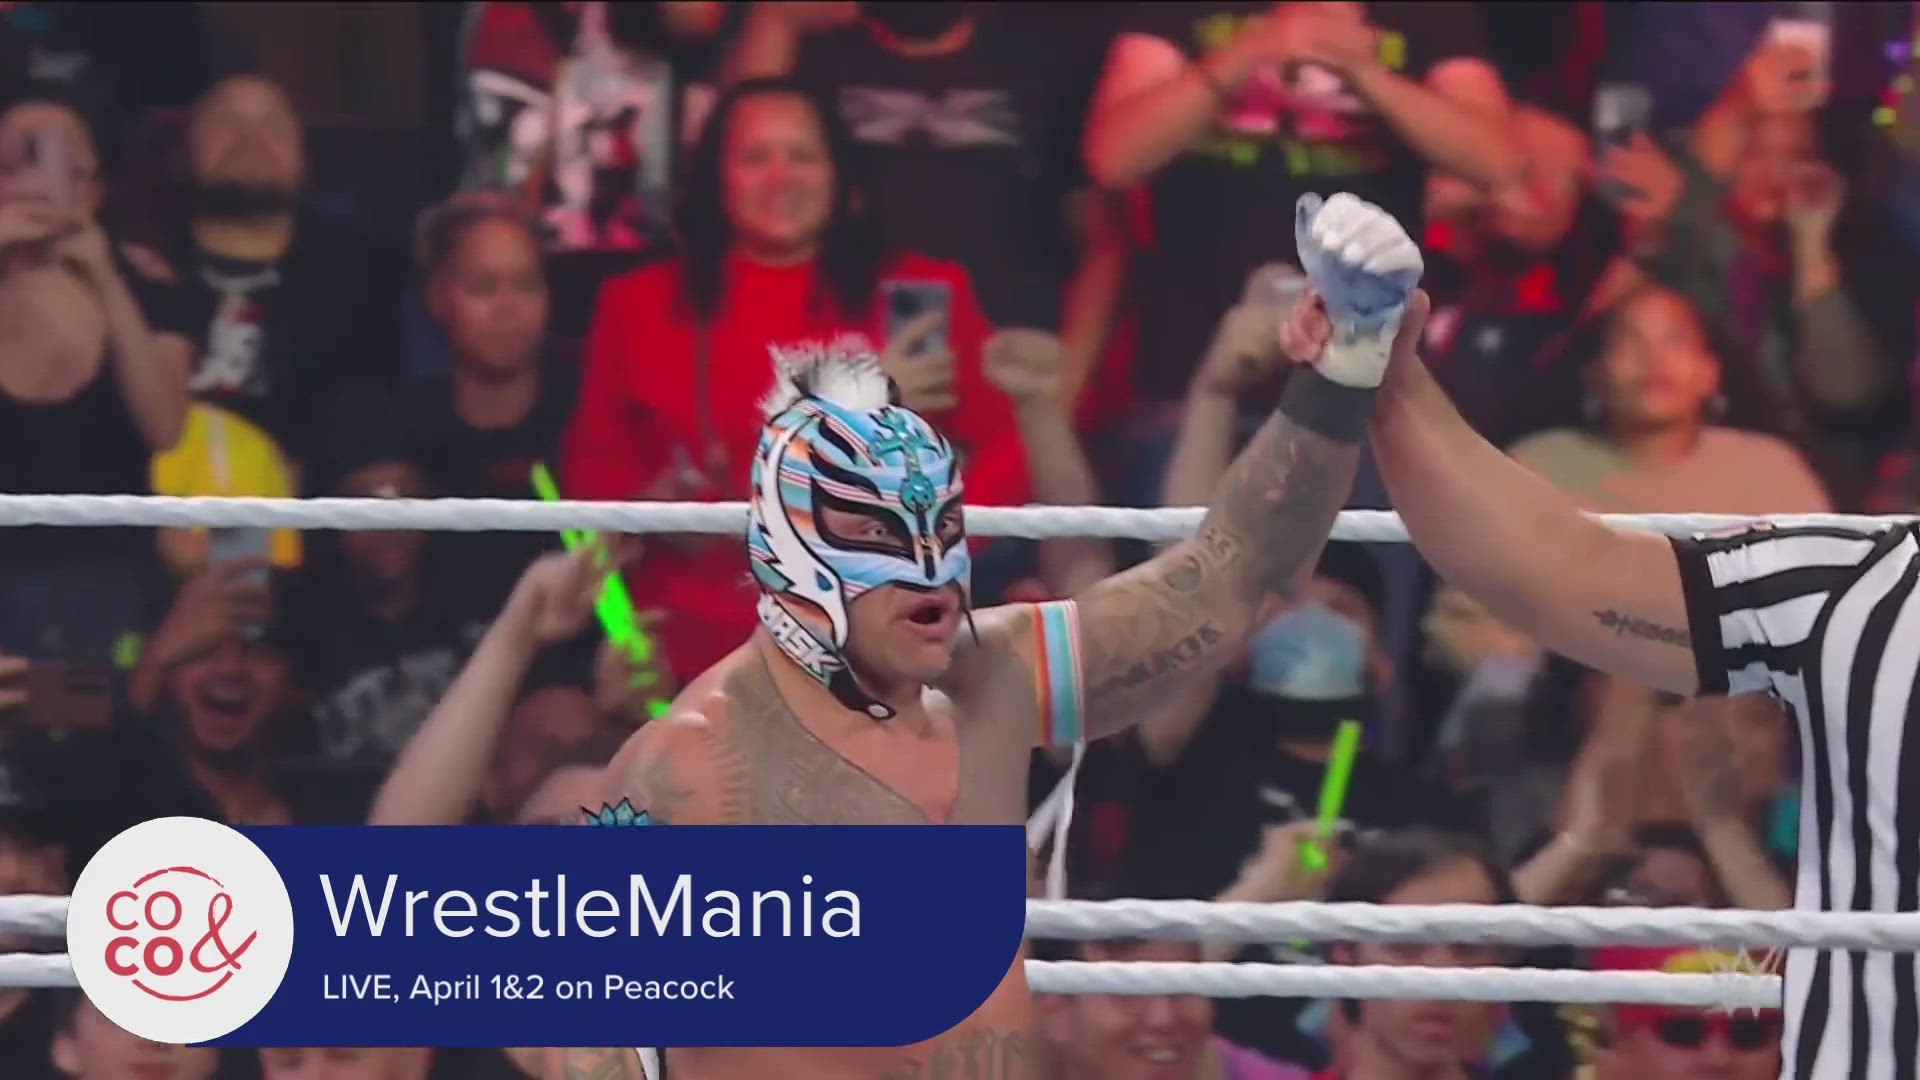 Watch Rey Mysterio at WrestleMania 39, live from LA on Saturday and Sunday only on Peacock.